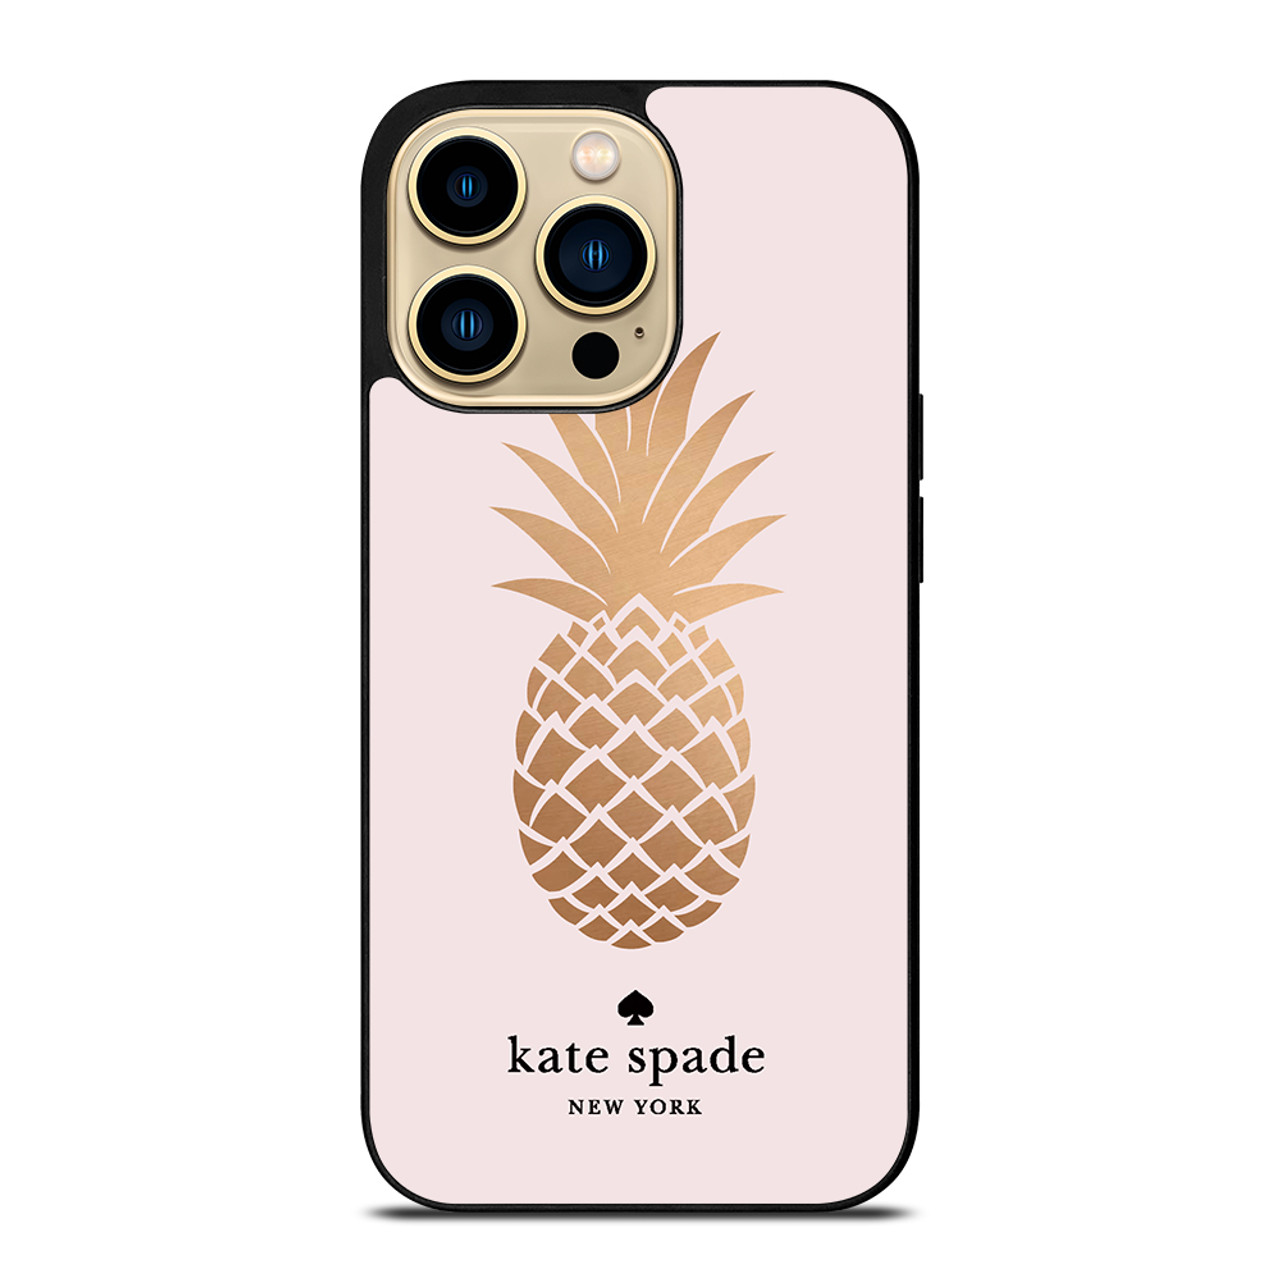 KATE SPADE PINEAPPLE iPhone 14 Pro Max Case Cover